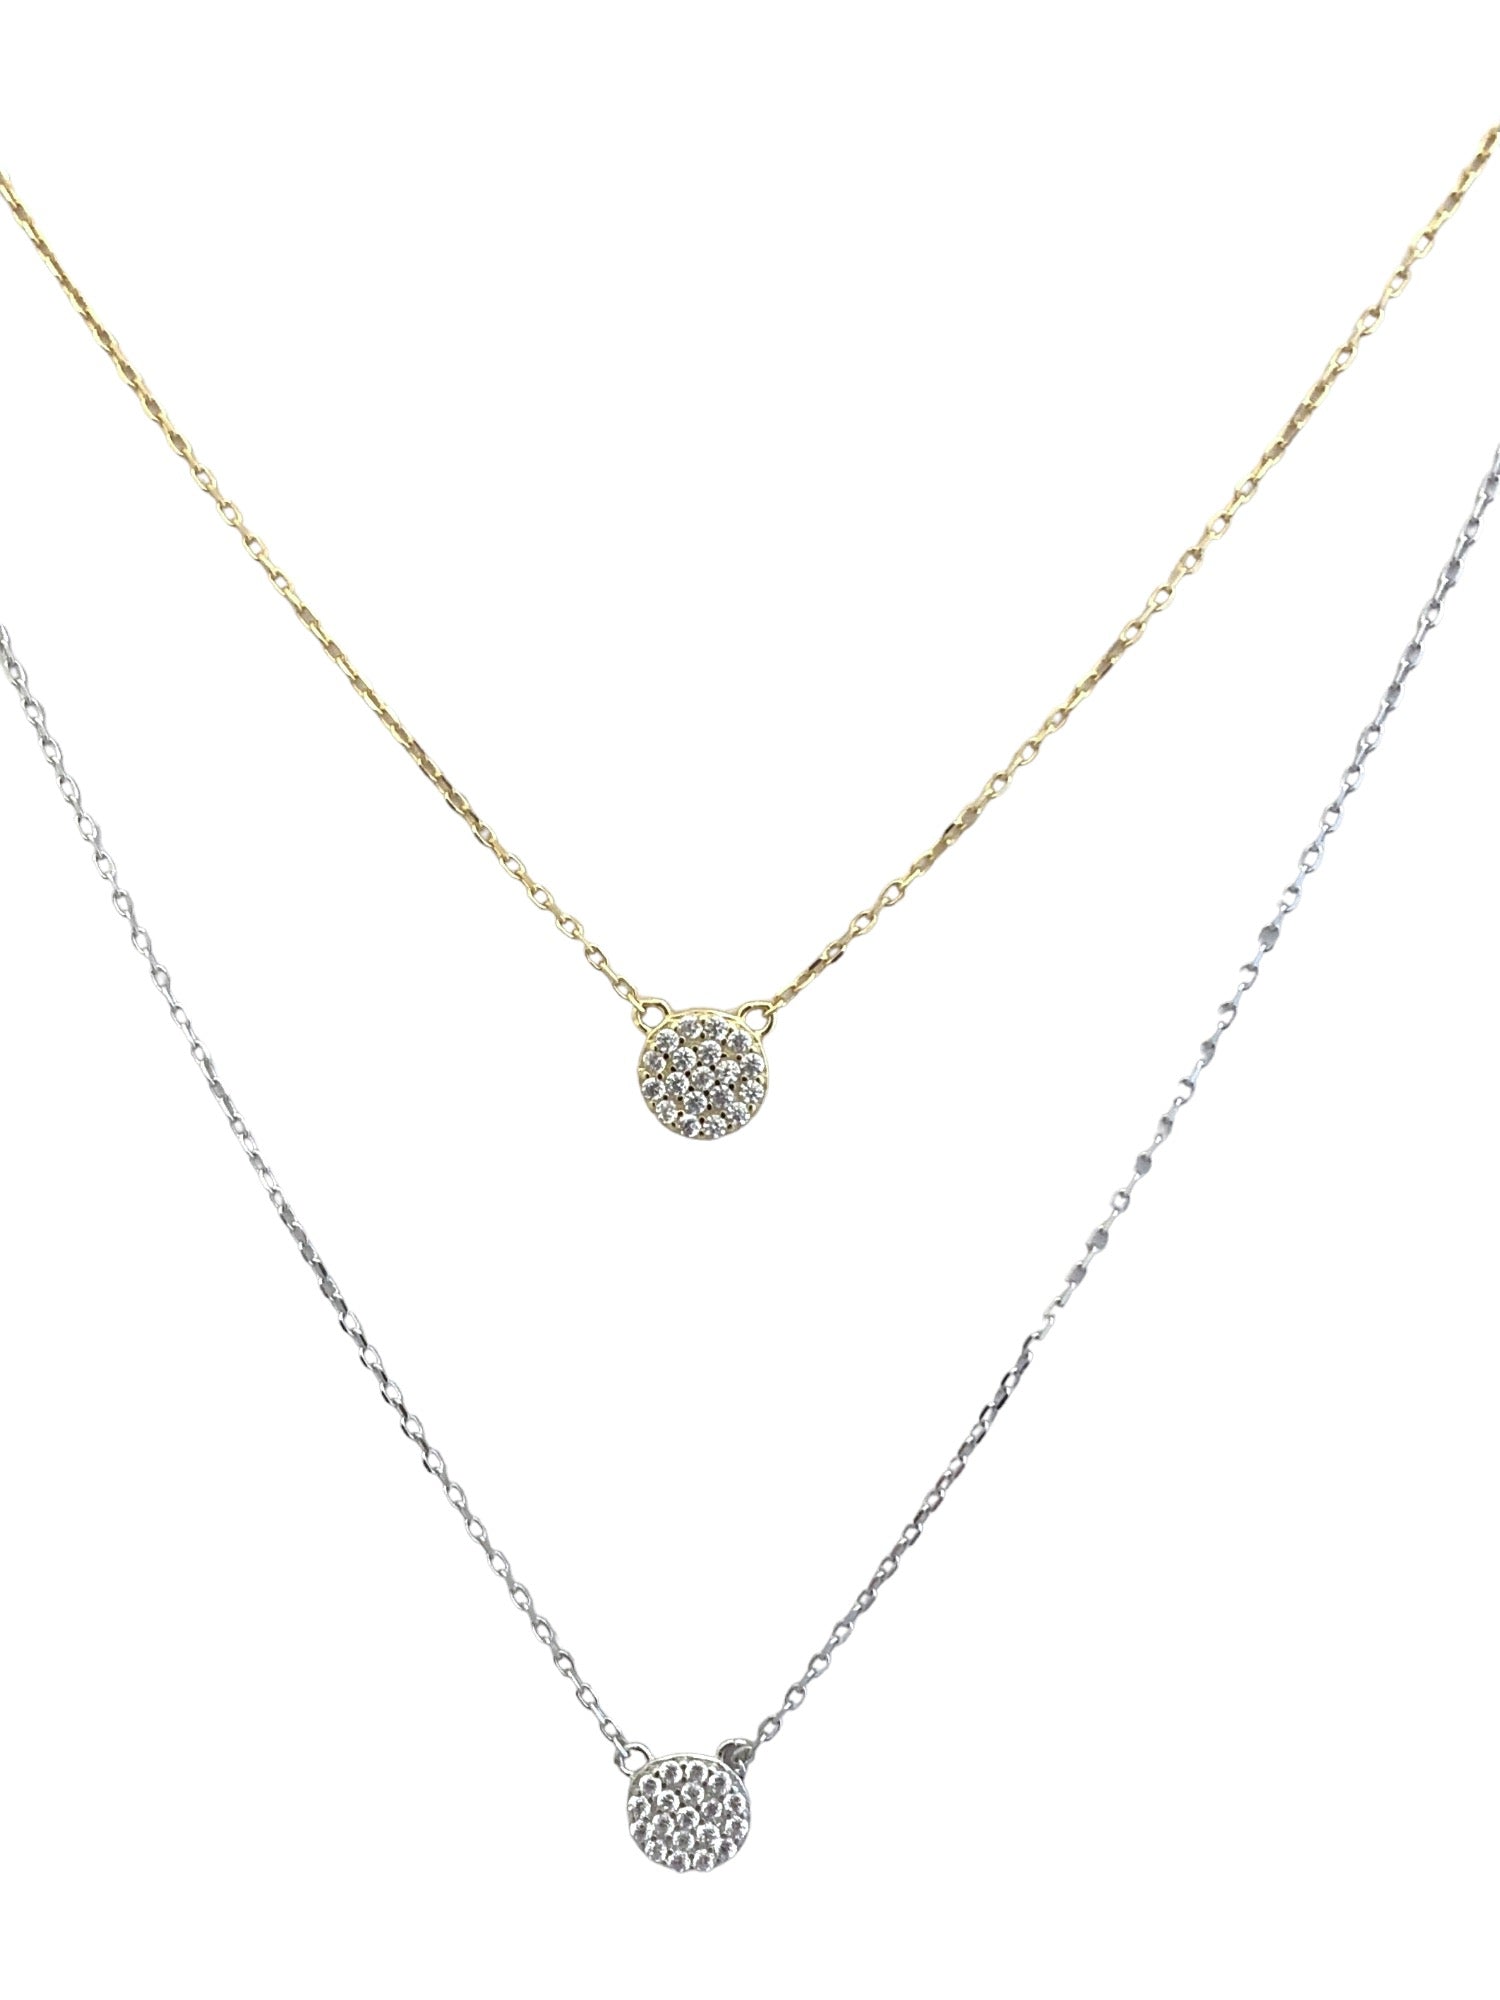 Delicate CZ Circle Necklace in Gold or Silver